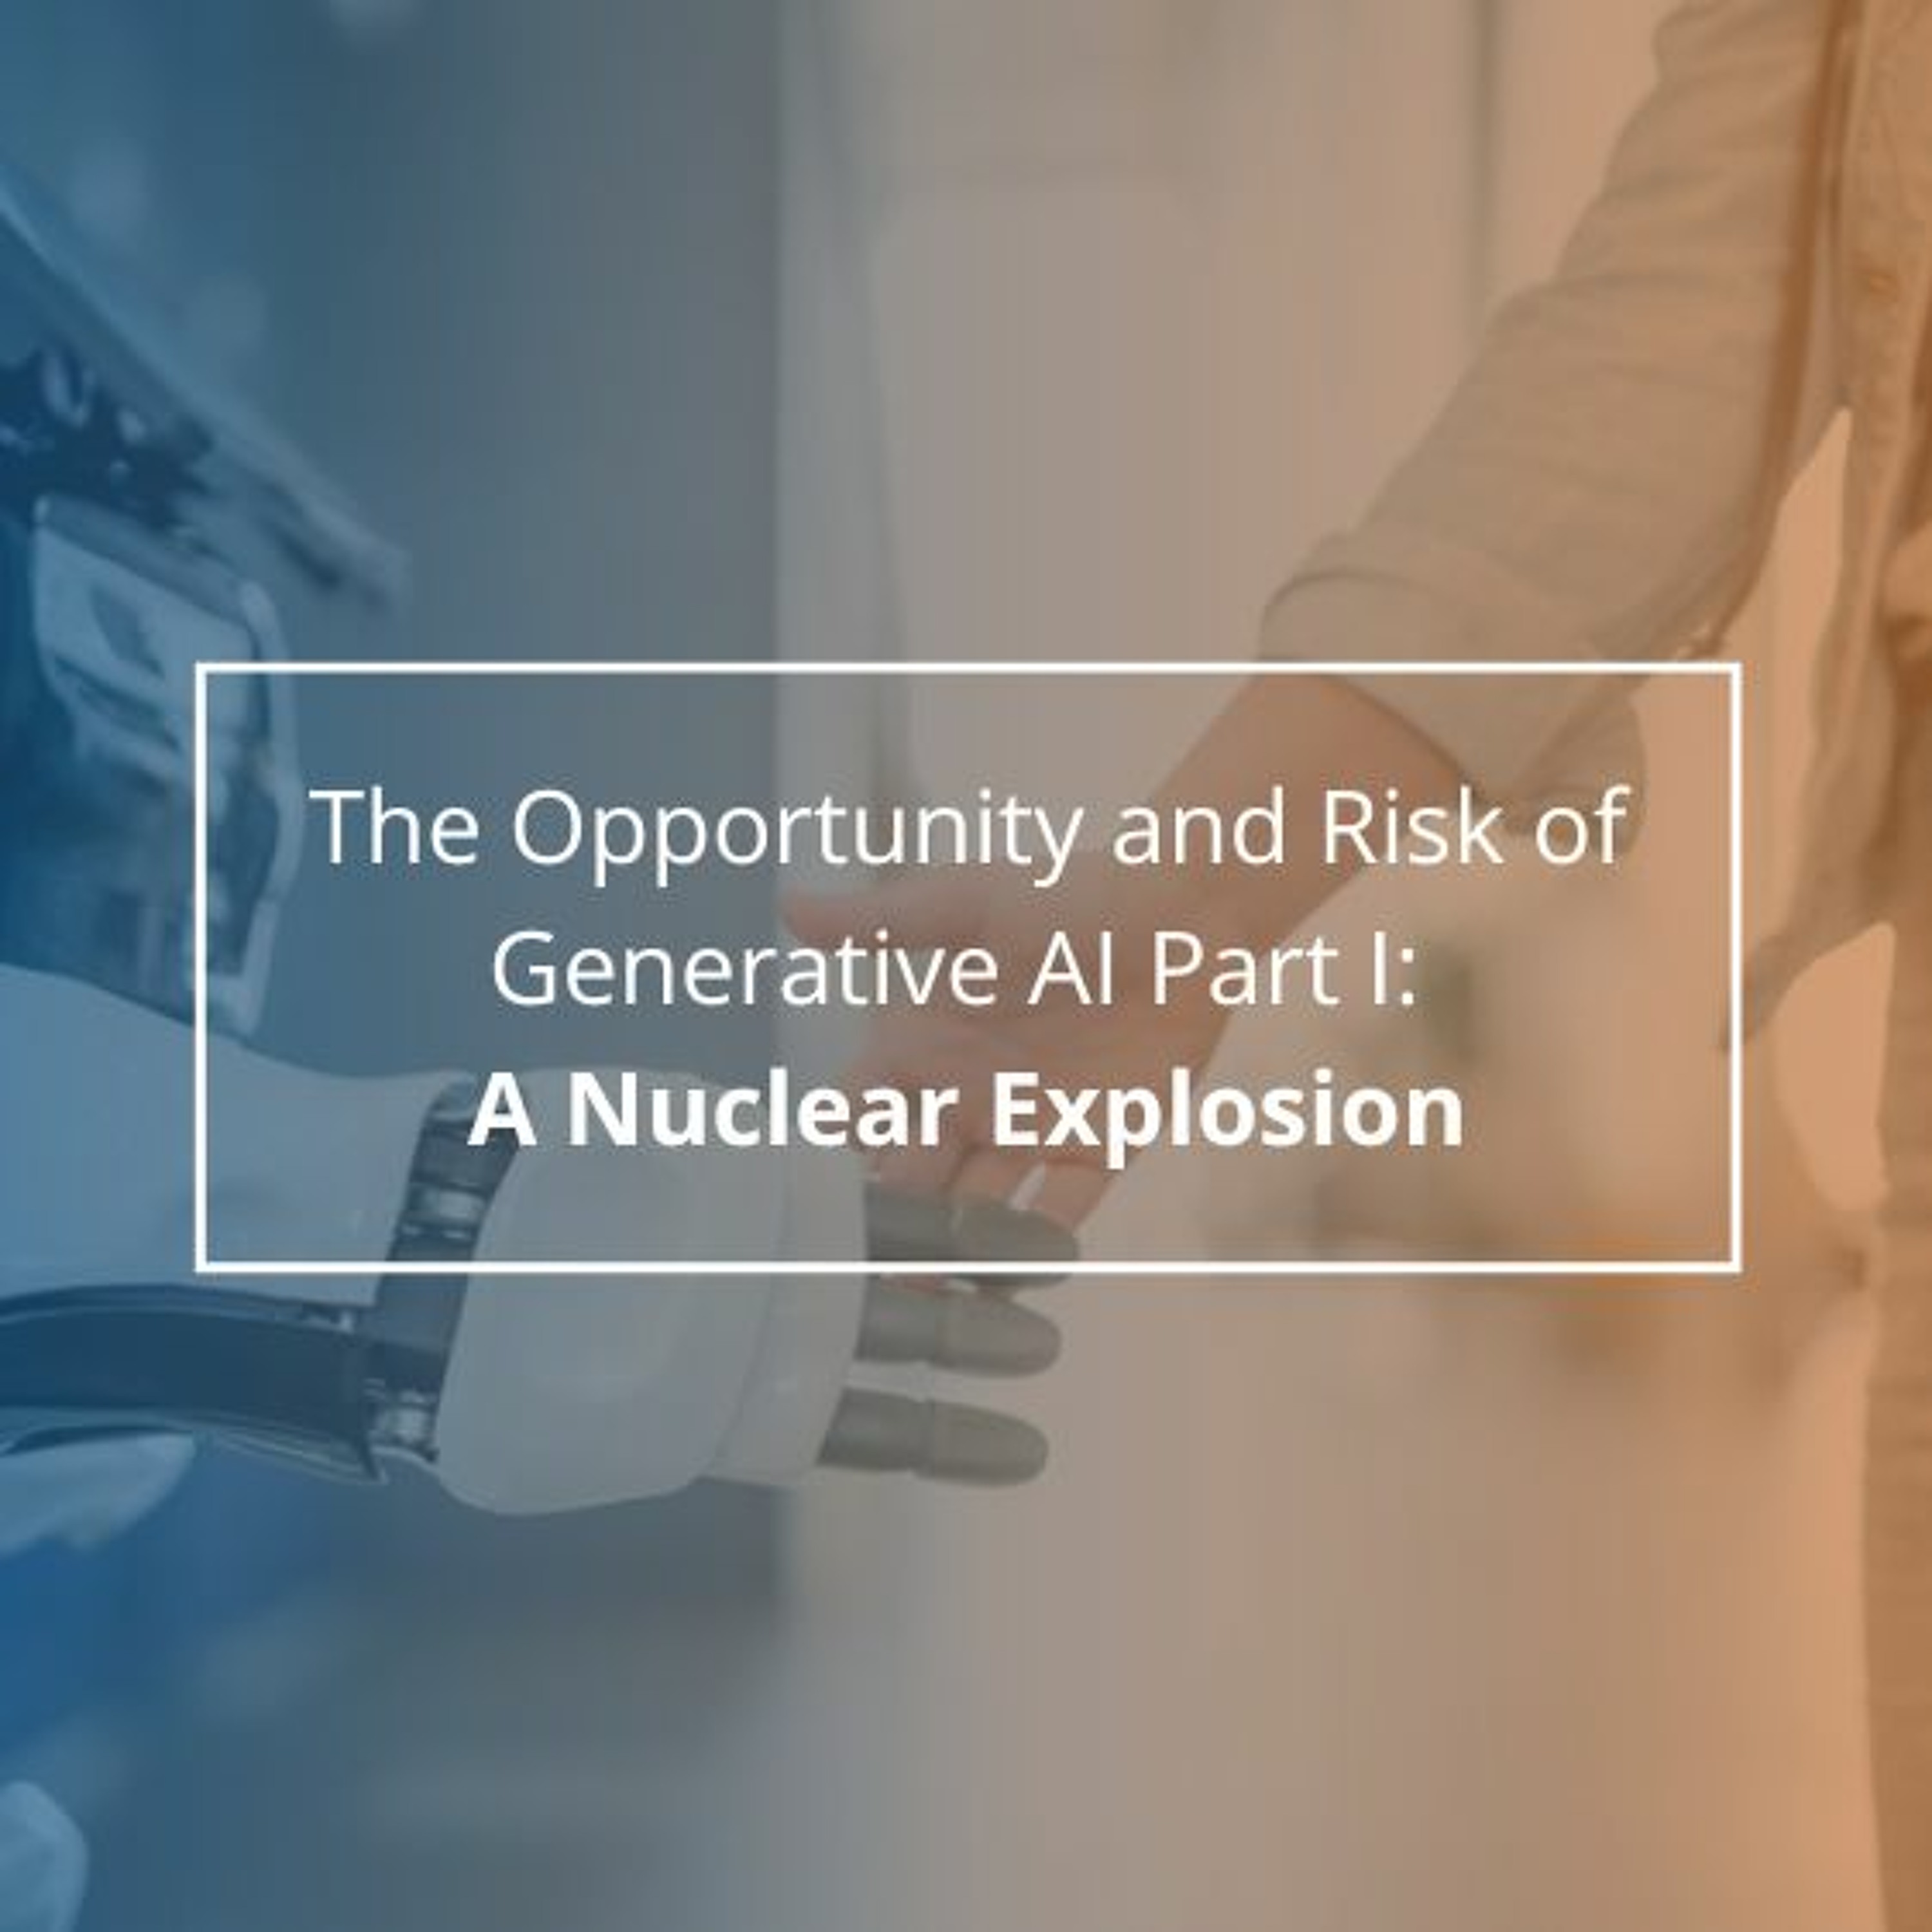 The Opportunity and Risk of Generative AI Part I: A Nuclear Explosion - Audio Blog